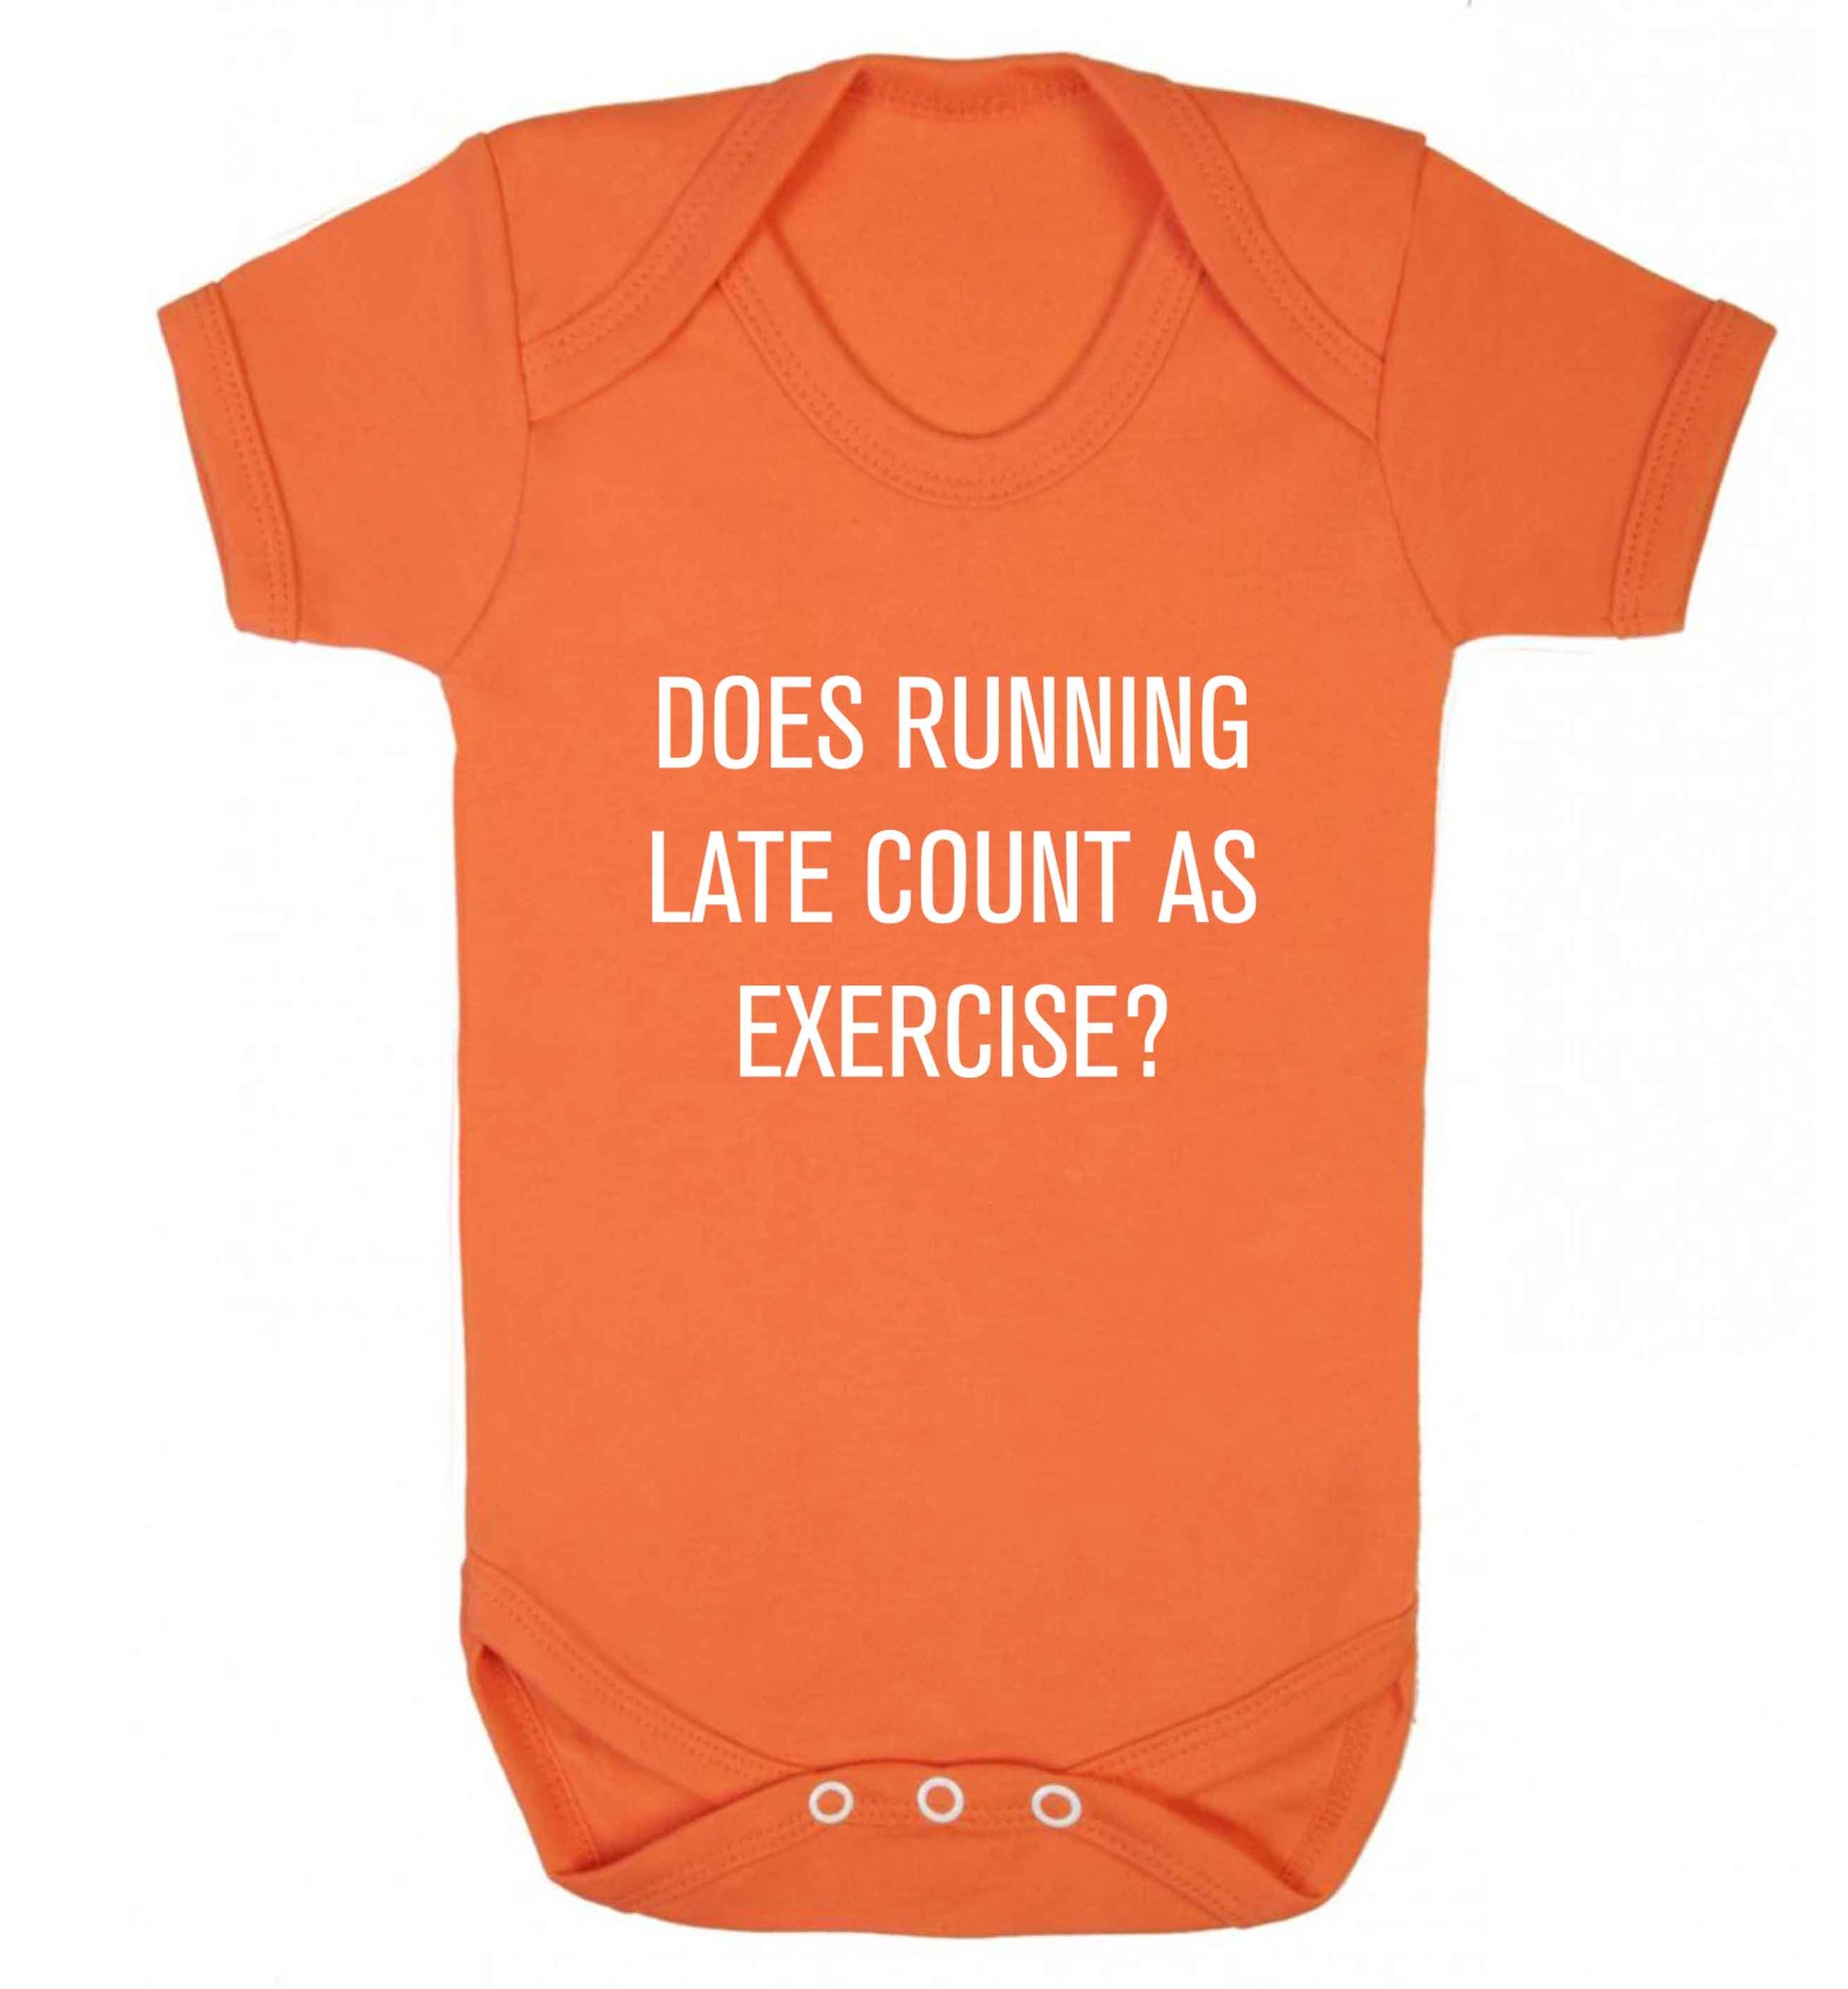 Does running late count as exercise? baby vest orange 18-24 months